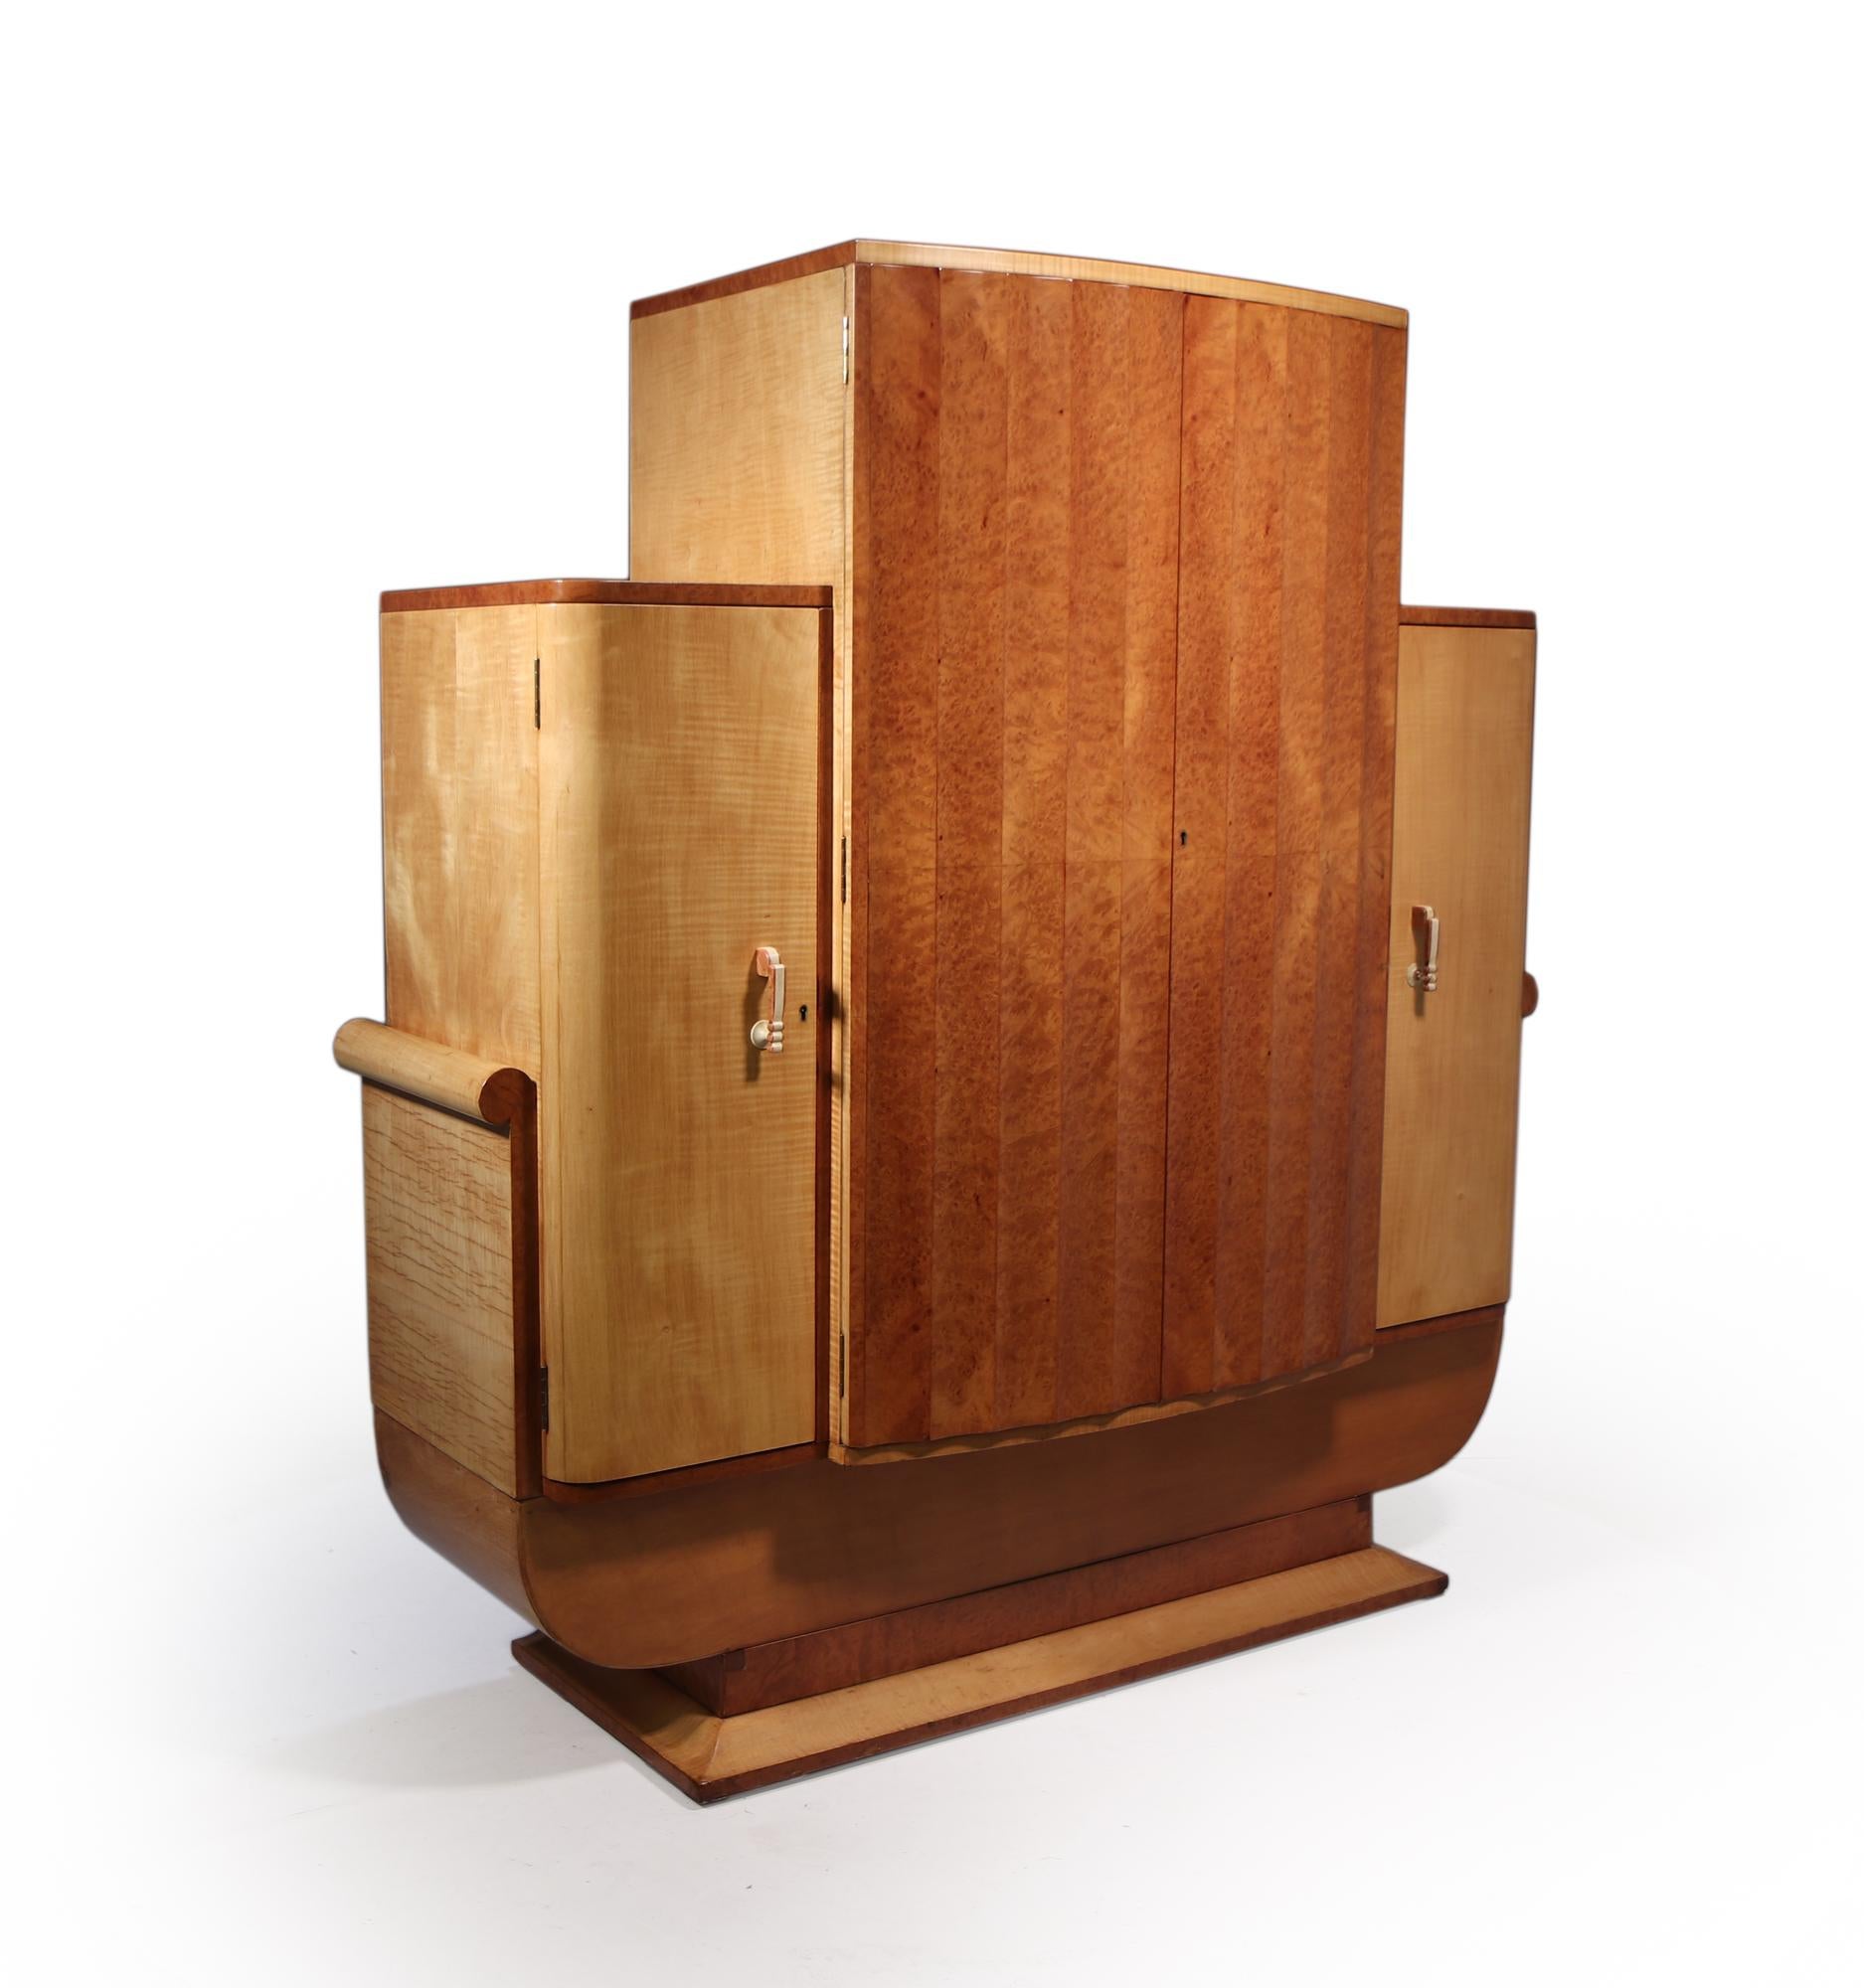 A design masterpiece designed and produced by by Harry and Lou Epstein in London in the 1930’s, this example in sycamore and burr walnut having fluted center doors that open to reveal cocktail making area with mirrored back and slide below is